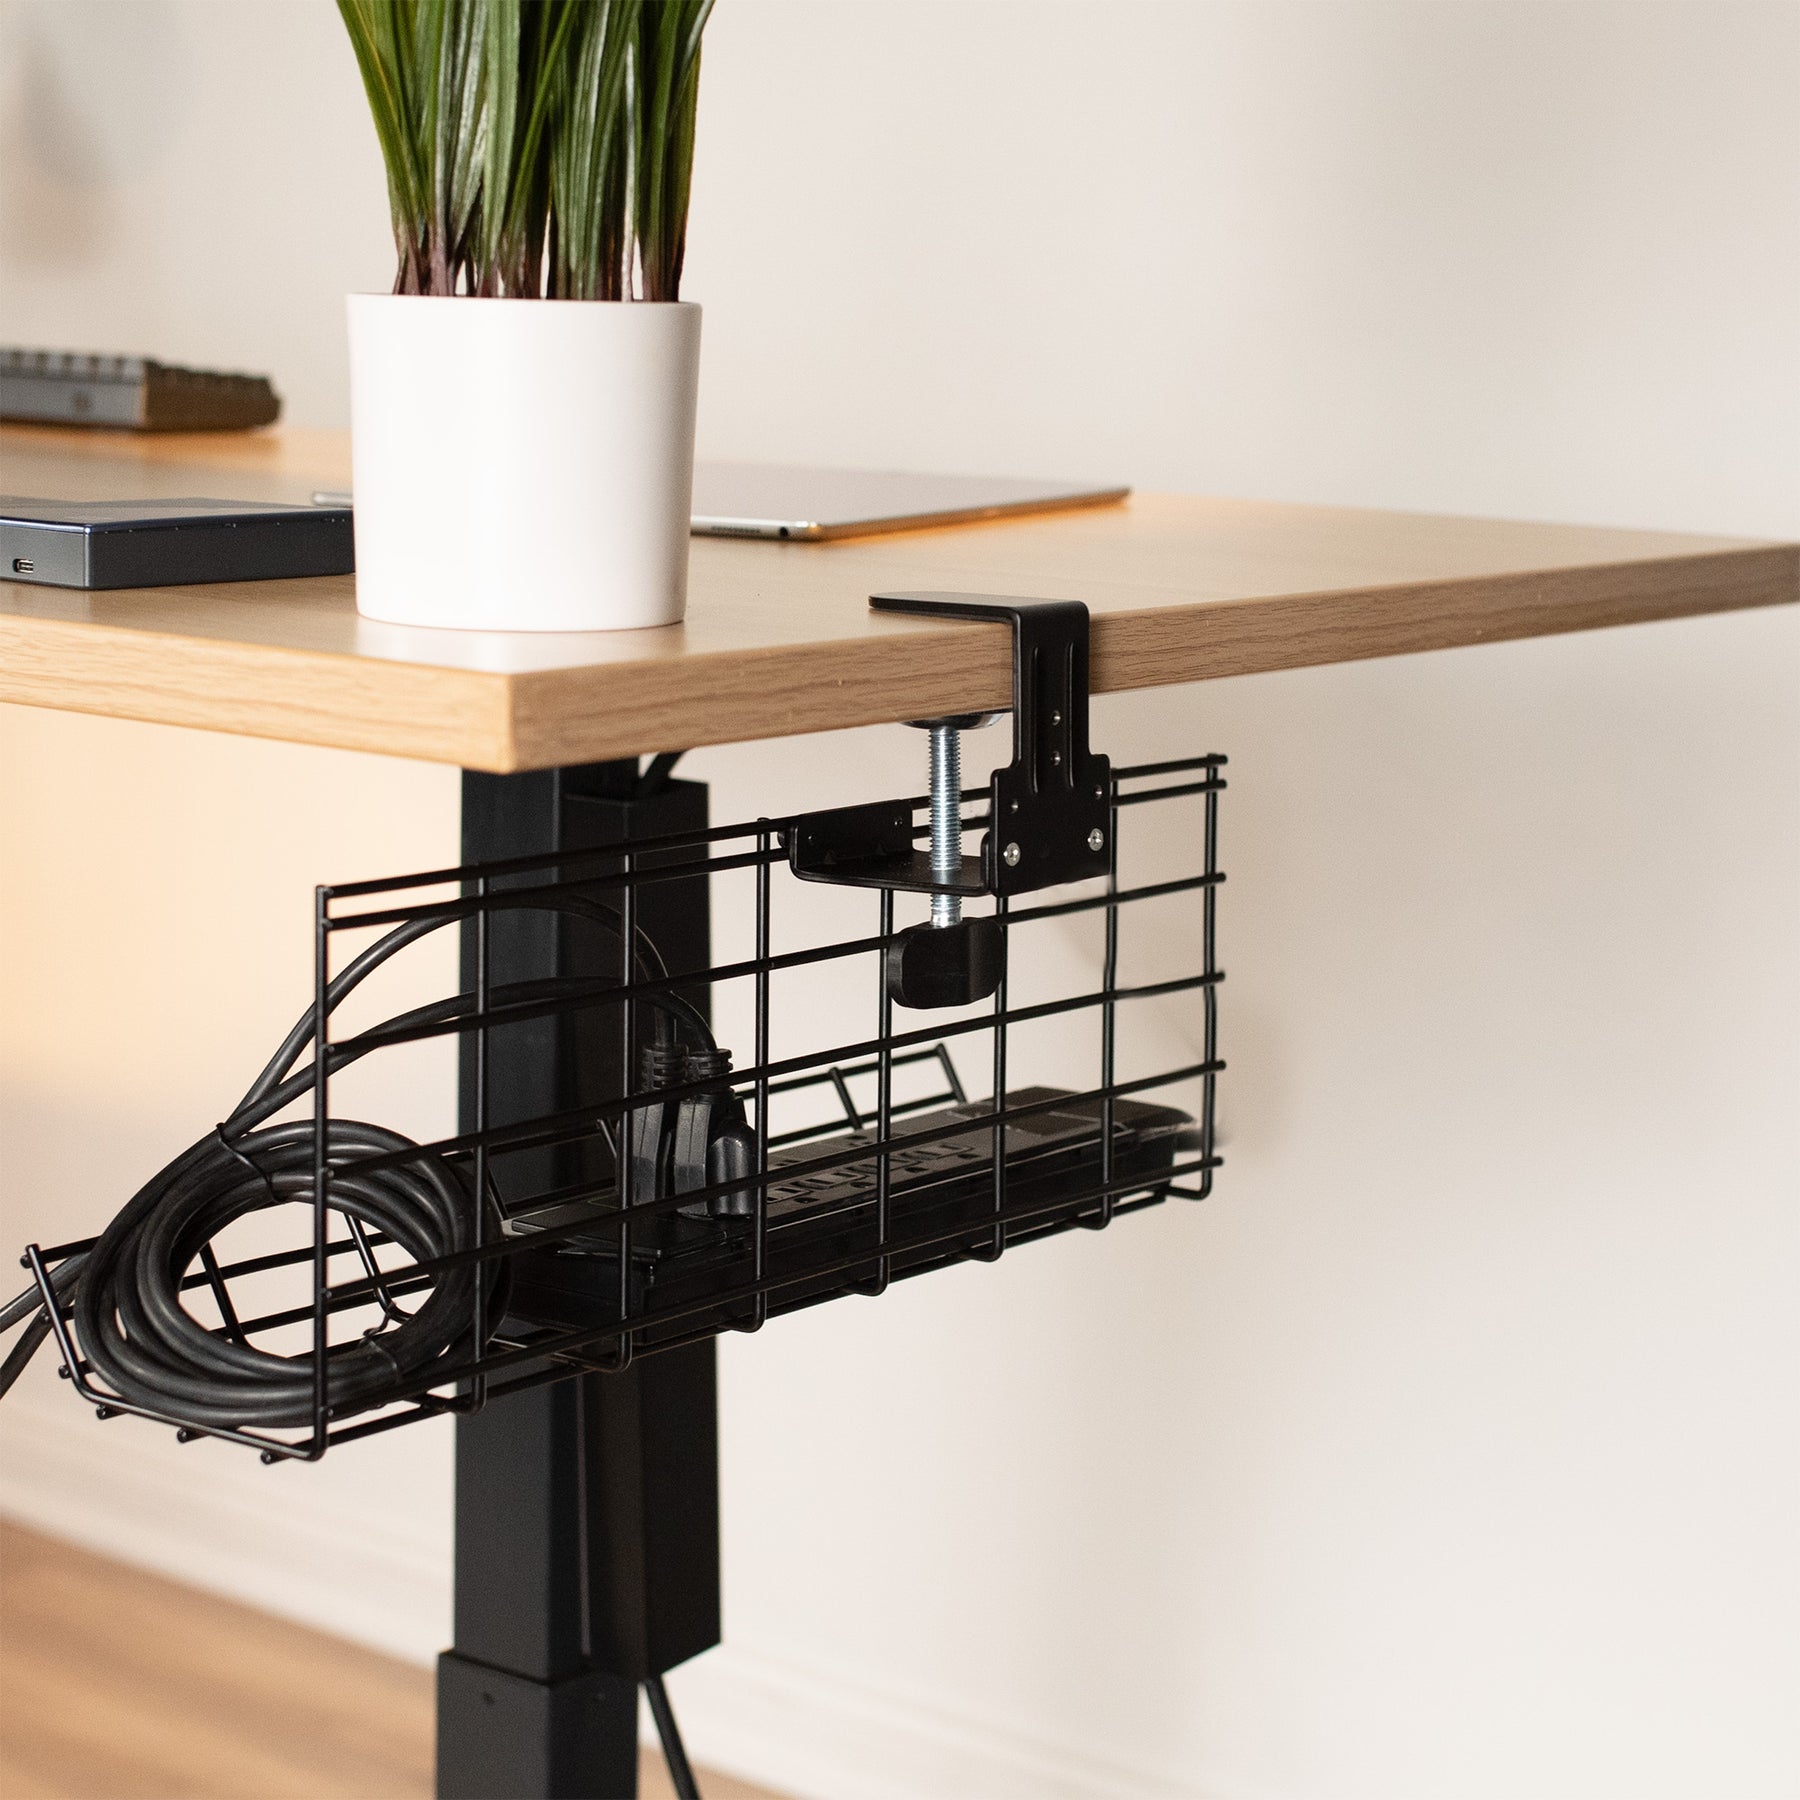 VIvo Black Clamp-on 60in Cable Management Desk Organizer